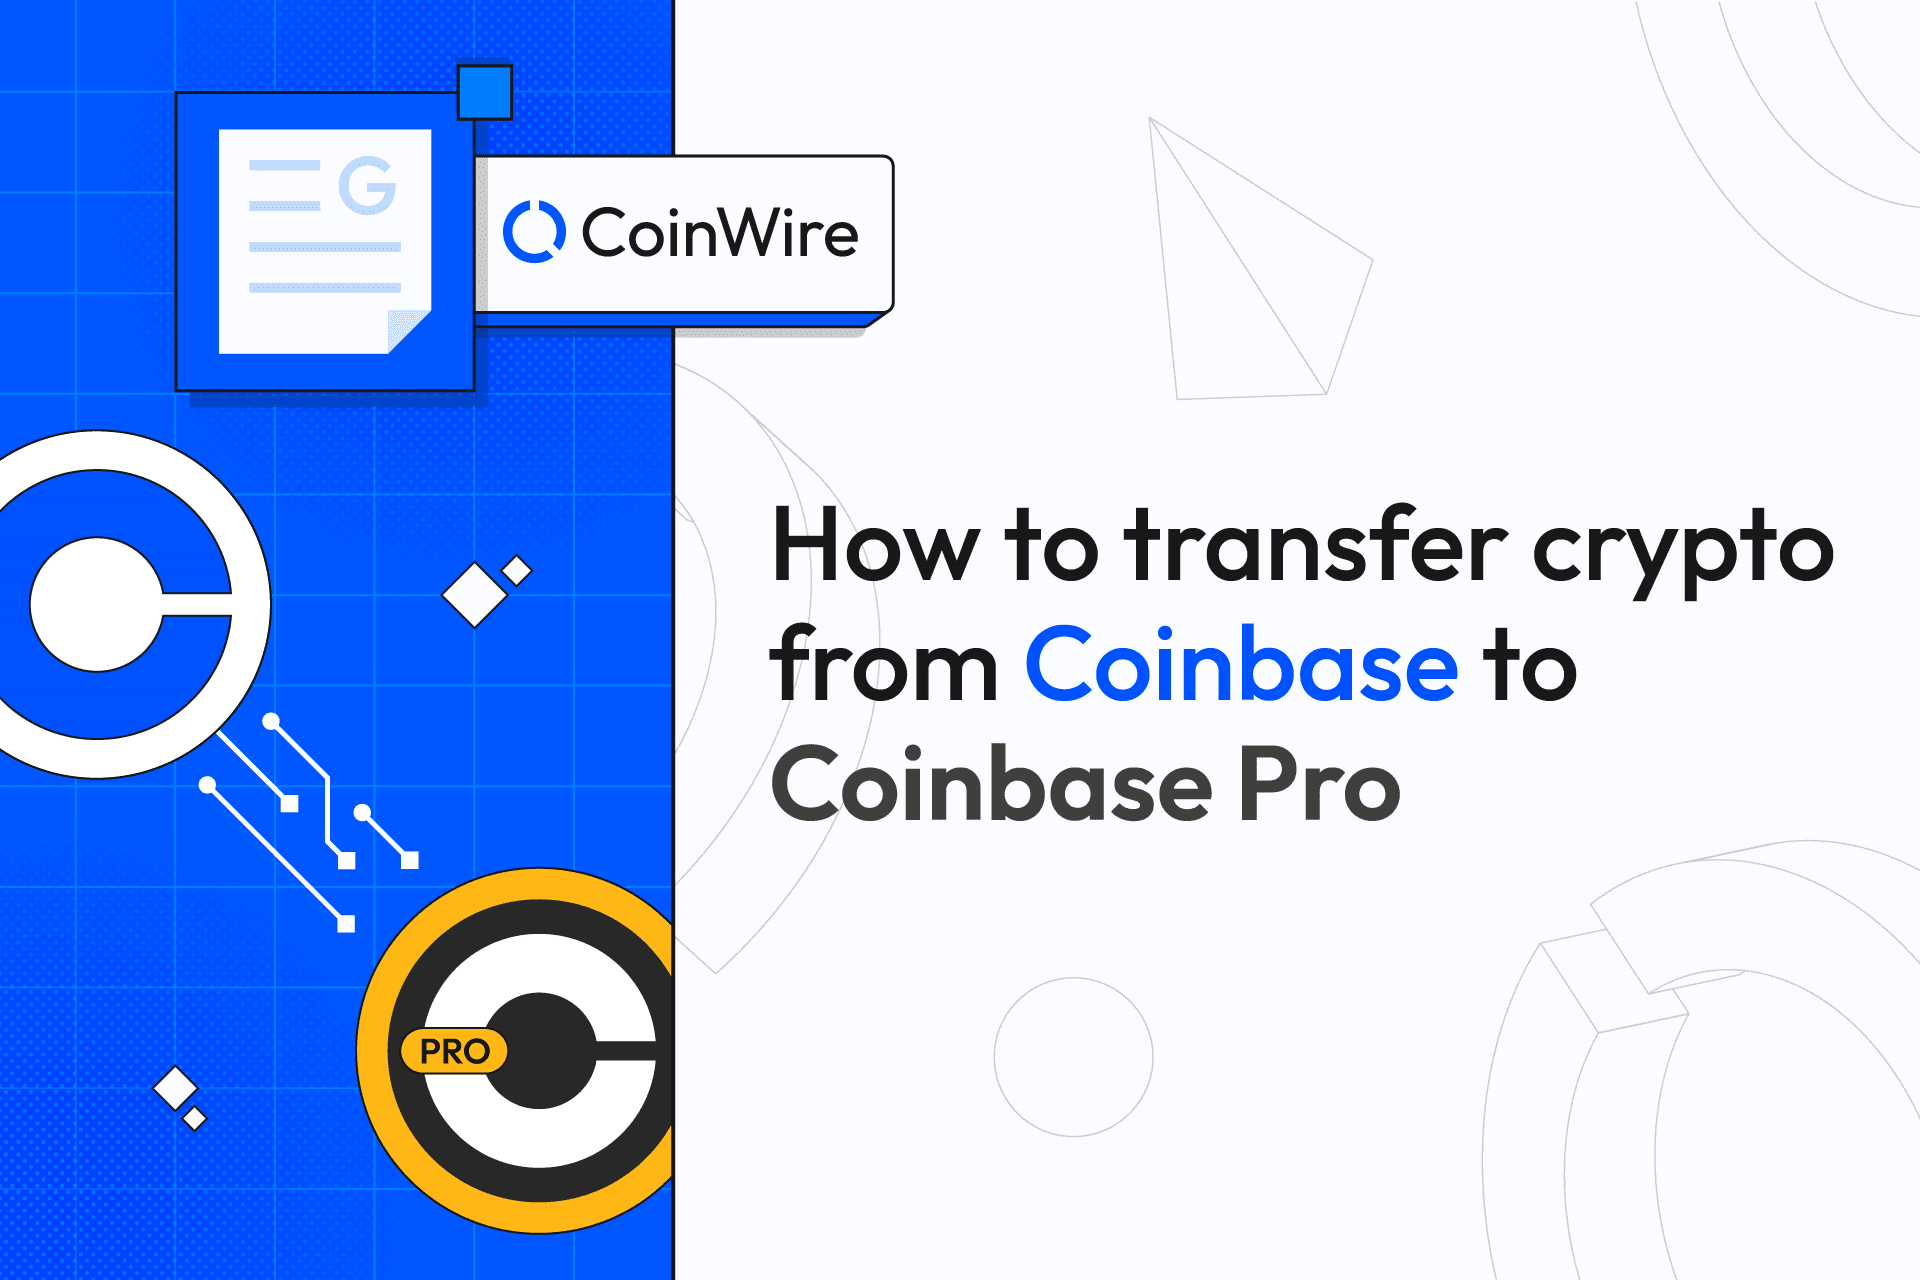 How to transfer crypto from gemini to coinbase wallet bitcoin ethereum bitcoin difference